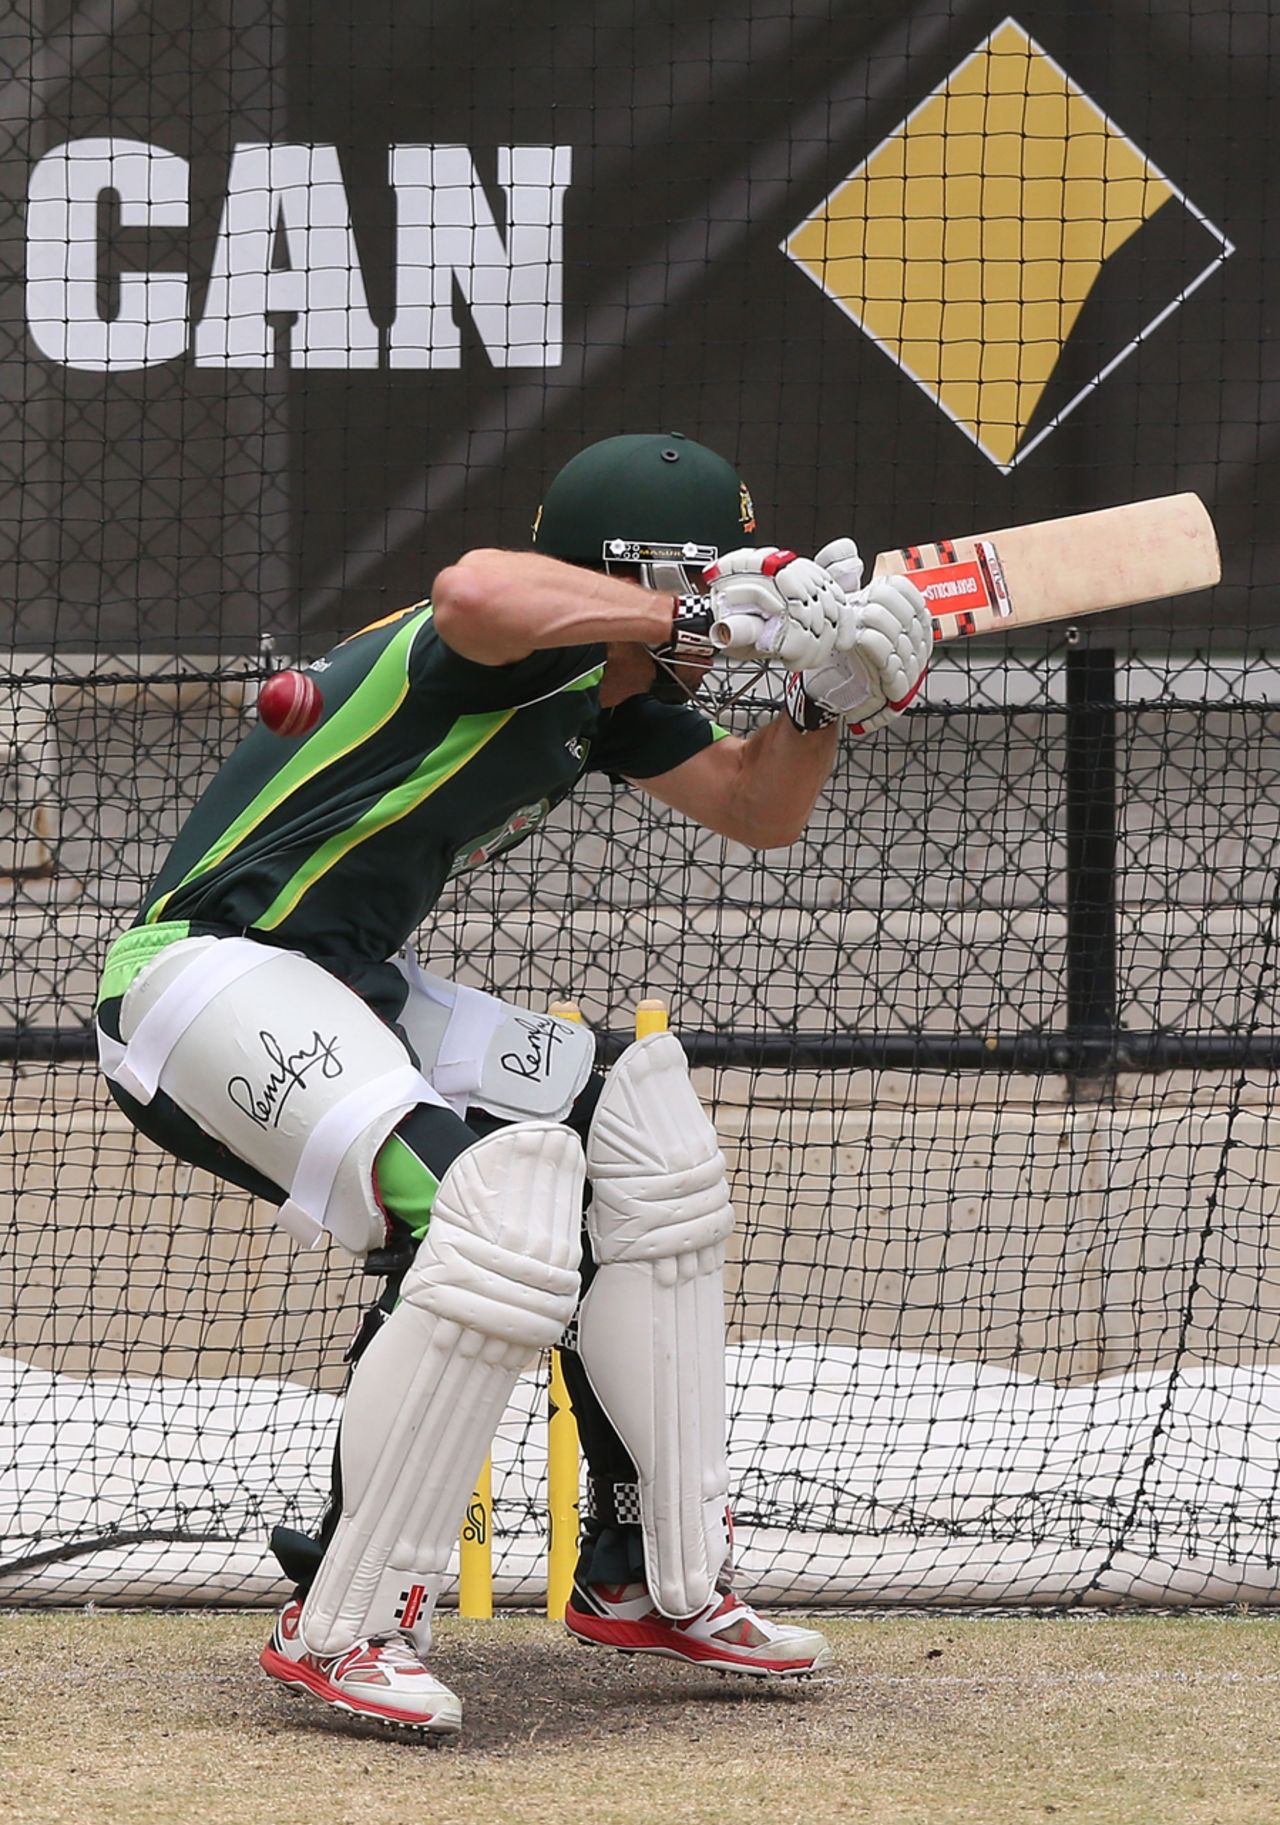 Shaun Marsh faces up to some short stuff during practice, Adelaide, December 8, 2014